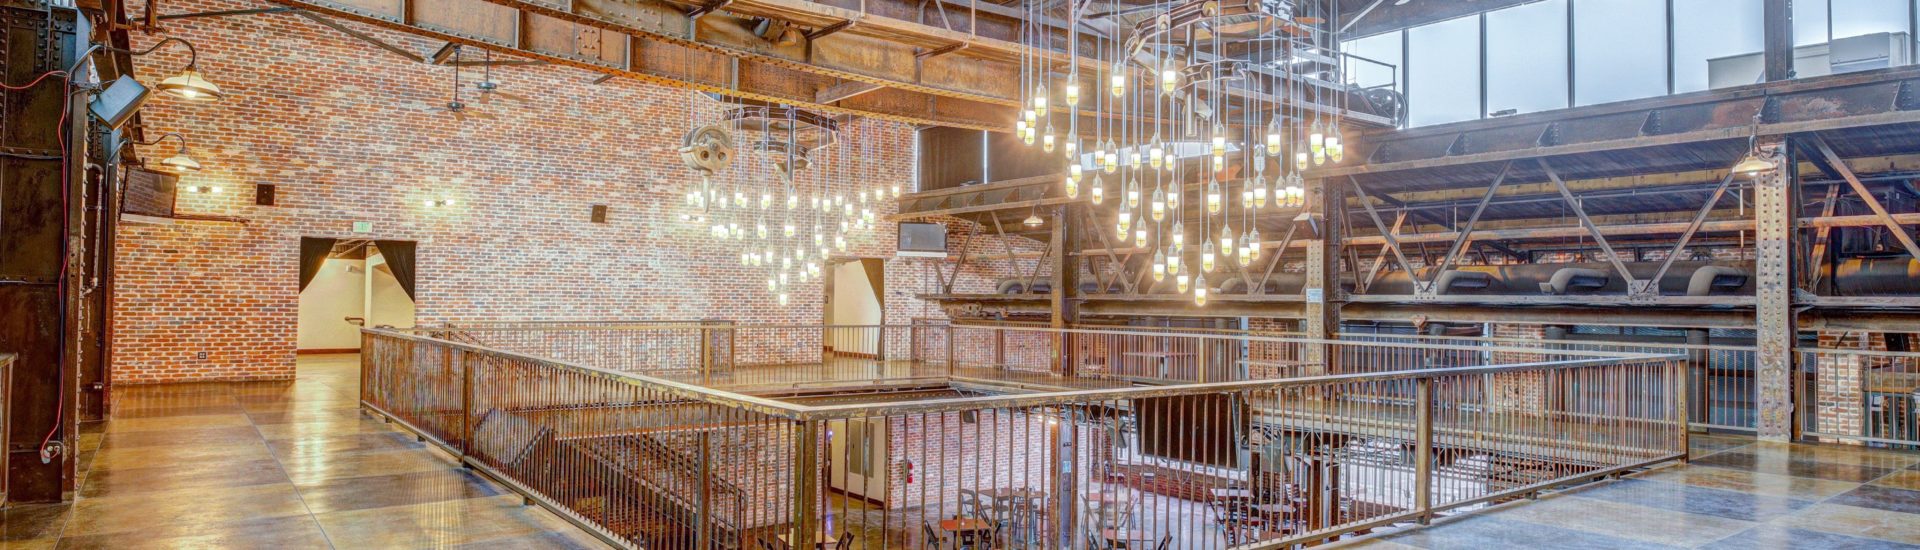 An open second floor with industrial ceiling, large tiled floor, red brick walls and 2 large chandeliers made with lots of light bulbs. The middle overlooks to the first floor.